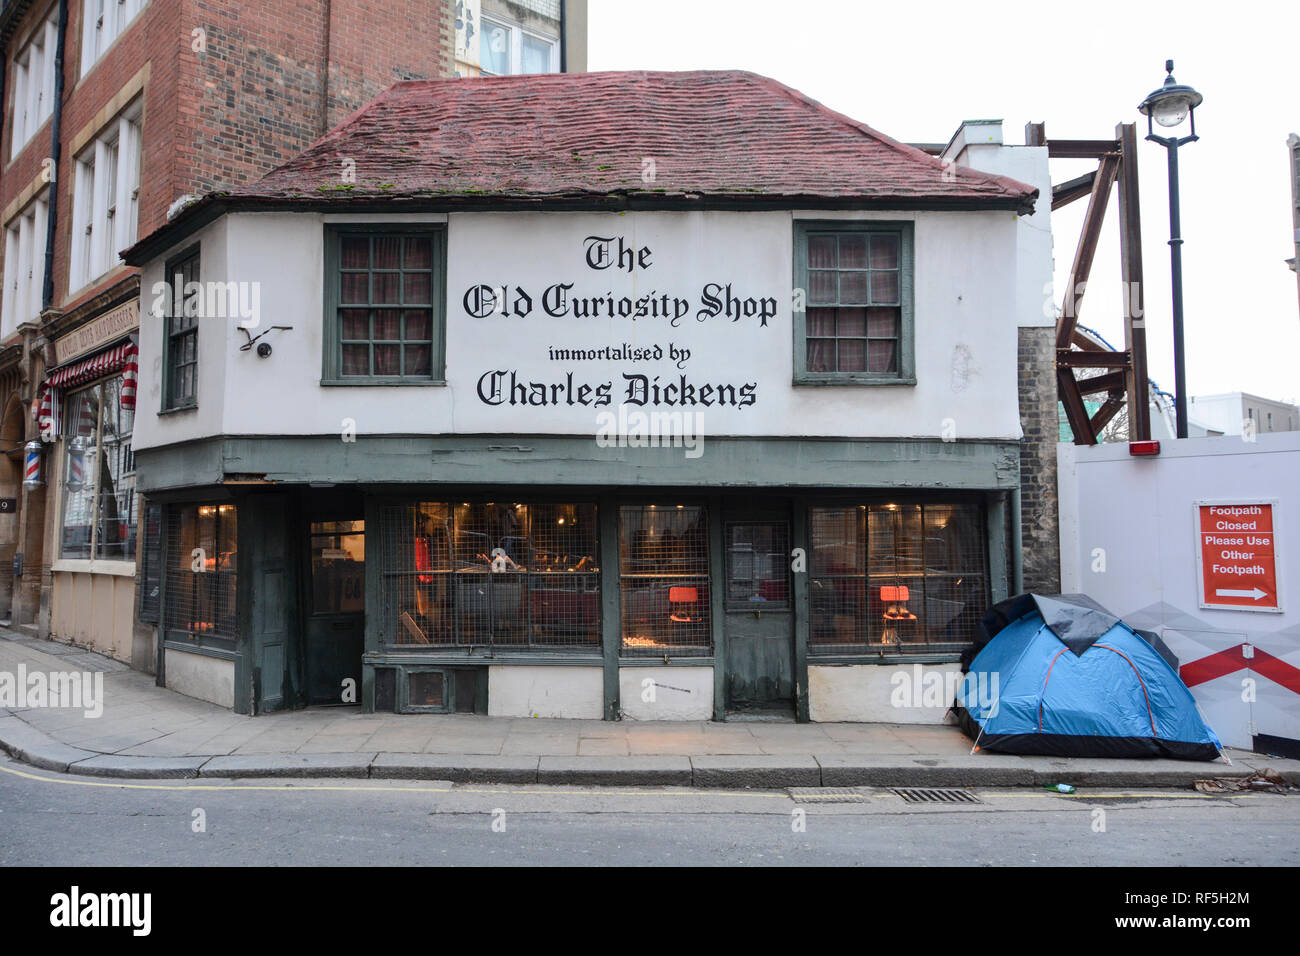 A rough sleeper's tent pitched next to LSE construction works and the famous Old Curiosity Shop on Portsmouth Street, London, WC2, UK Stock Photo